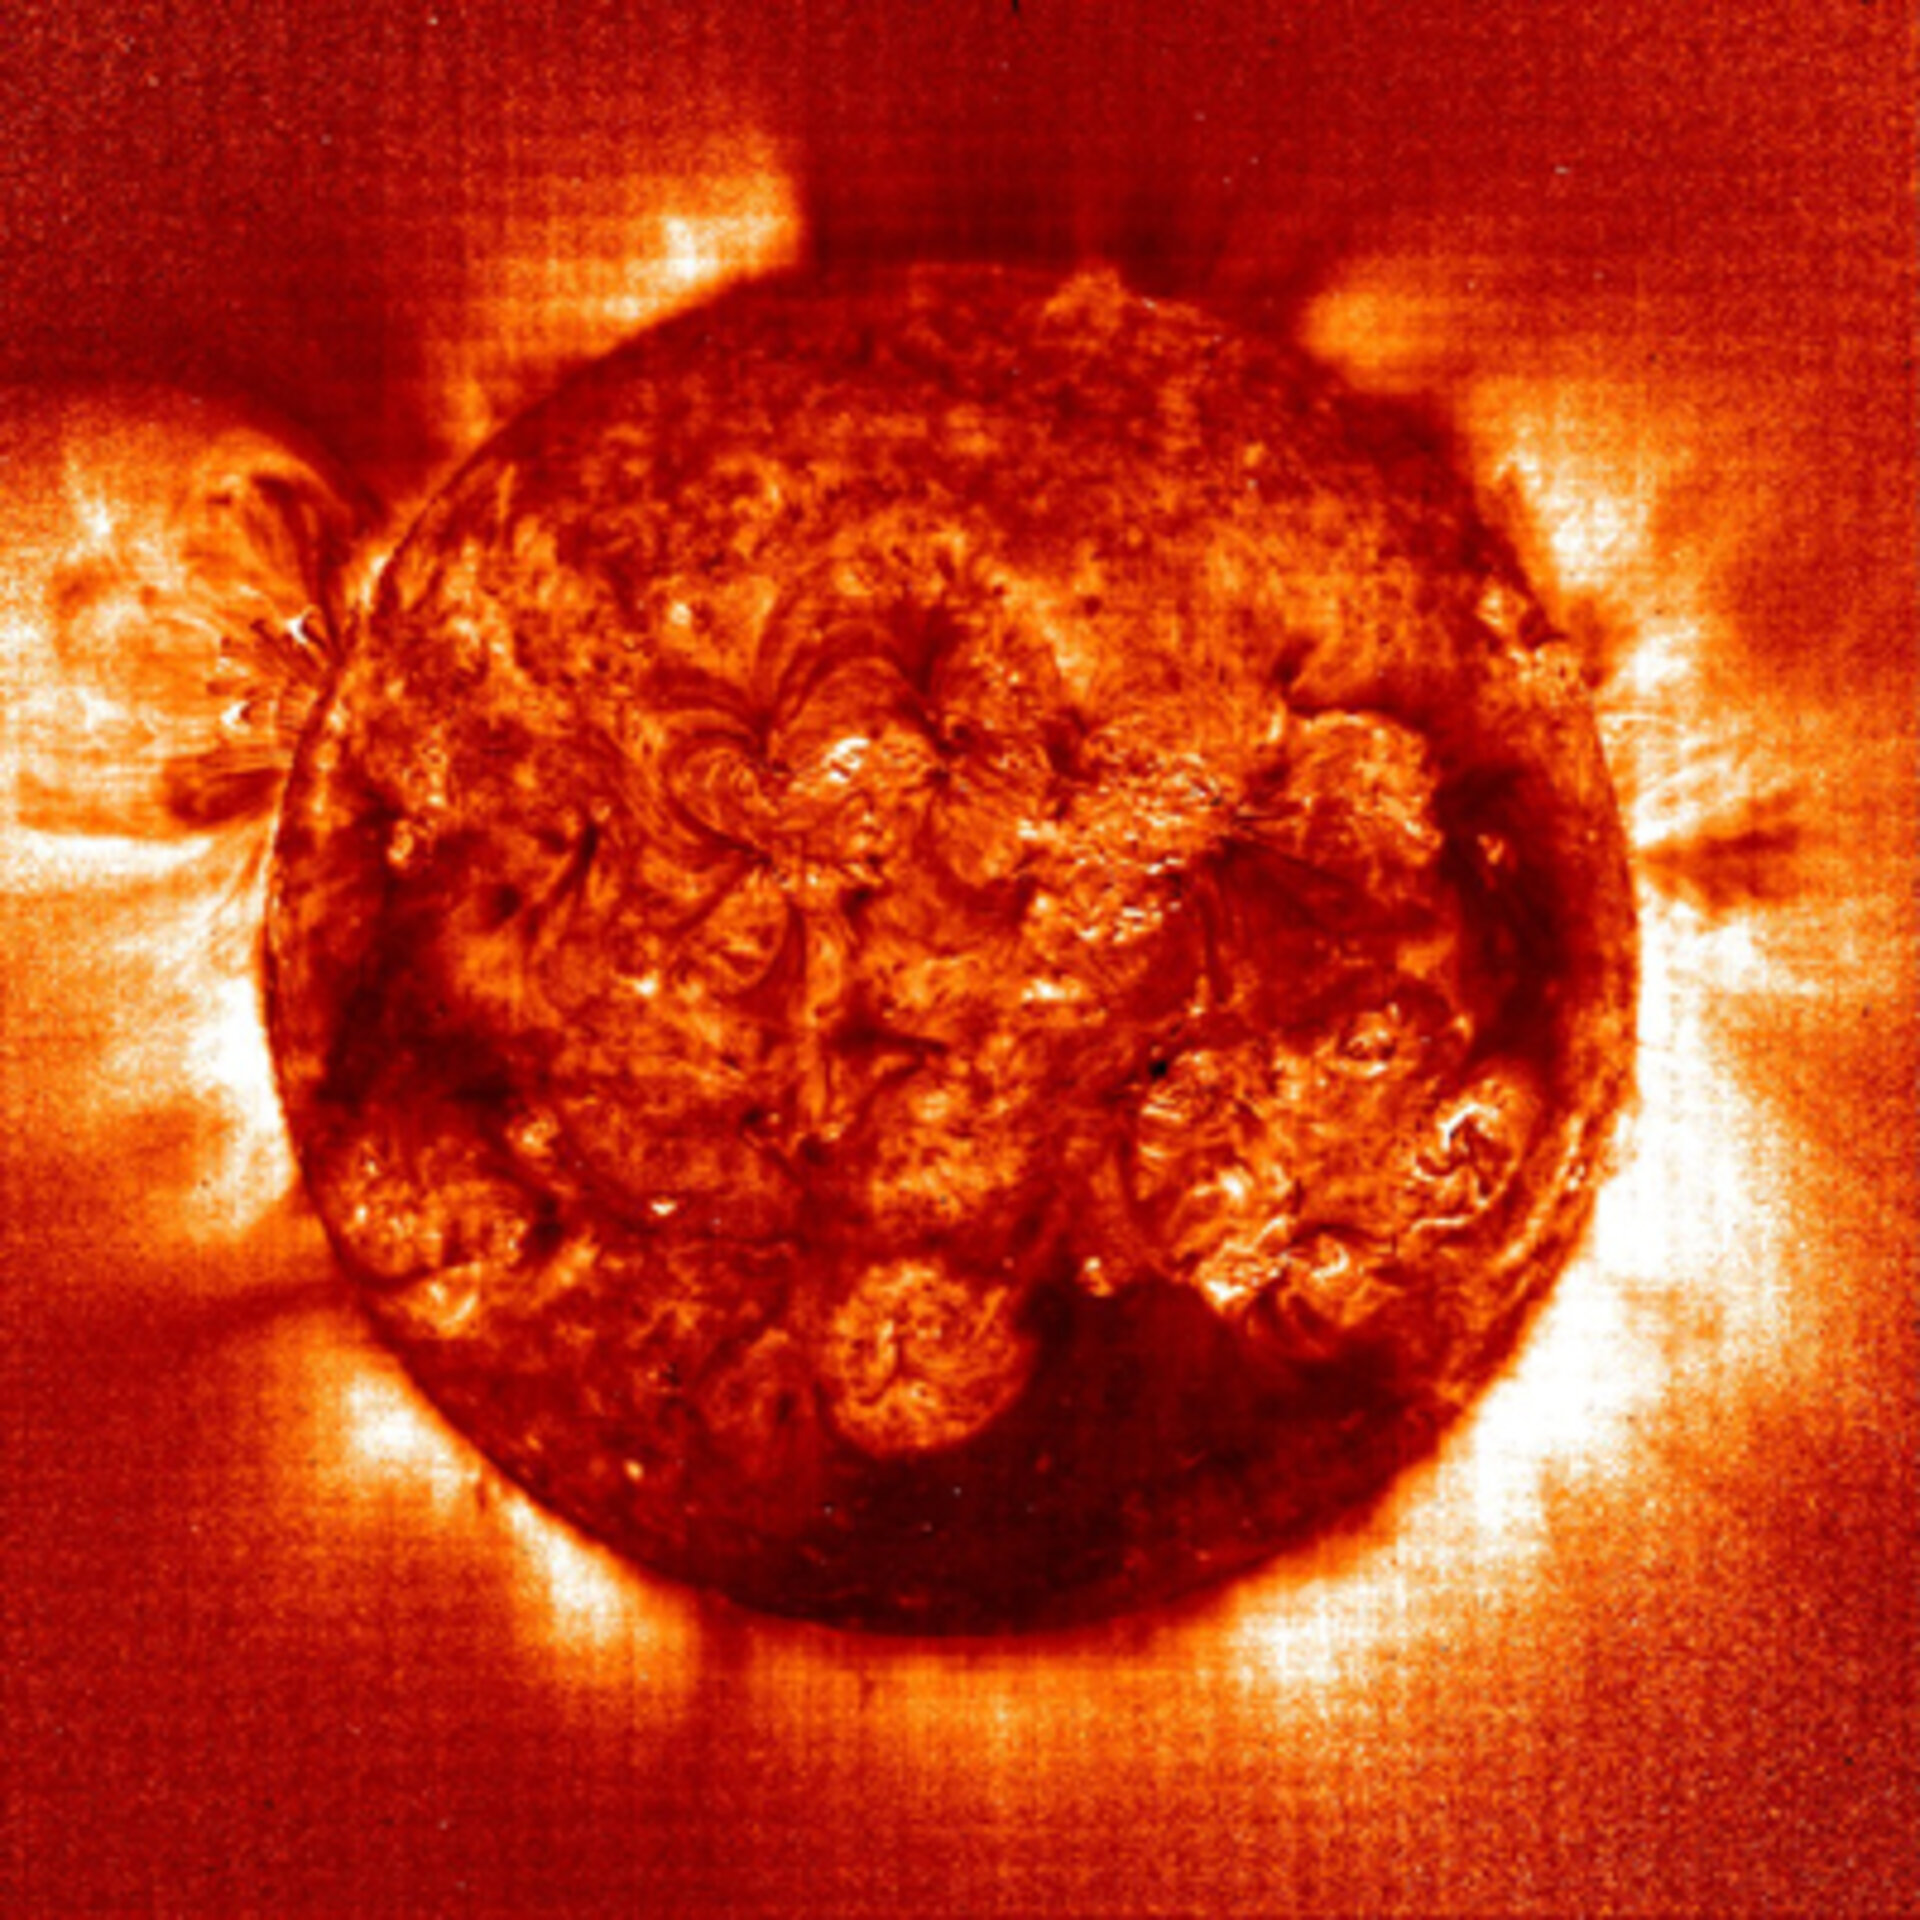 Temperature map of the Sun's corona as recorded by the EIT instrument on SOHO